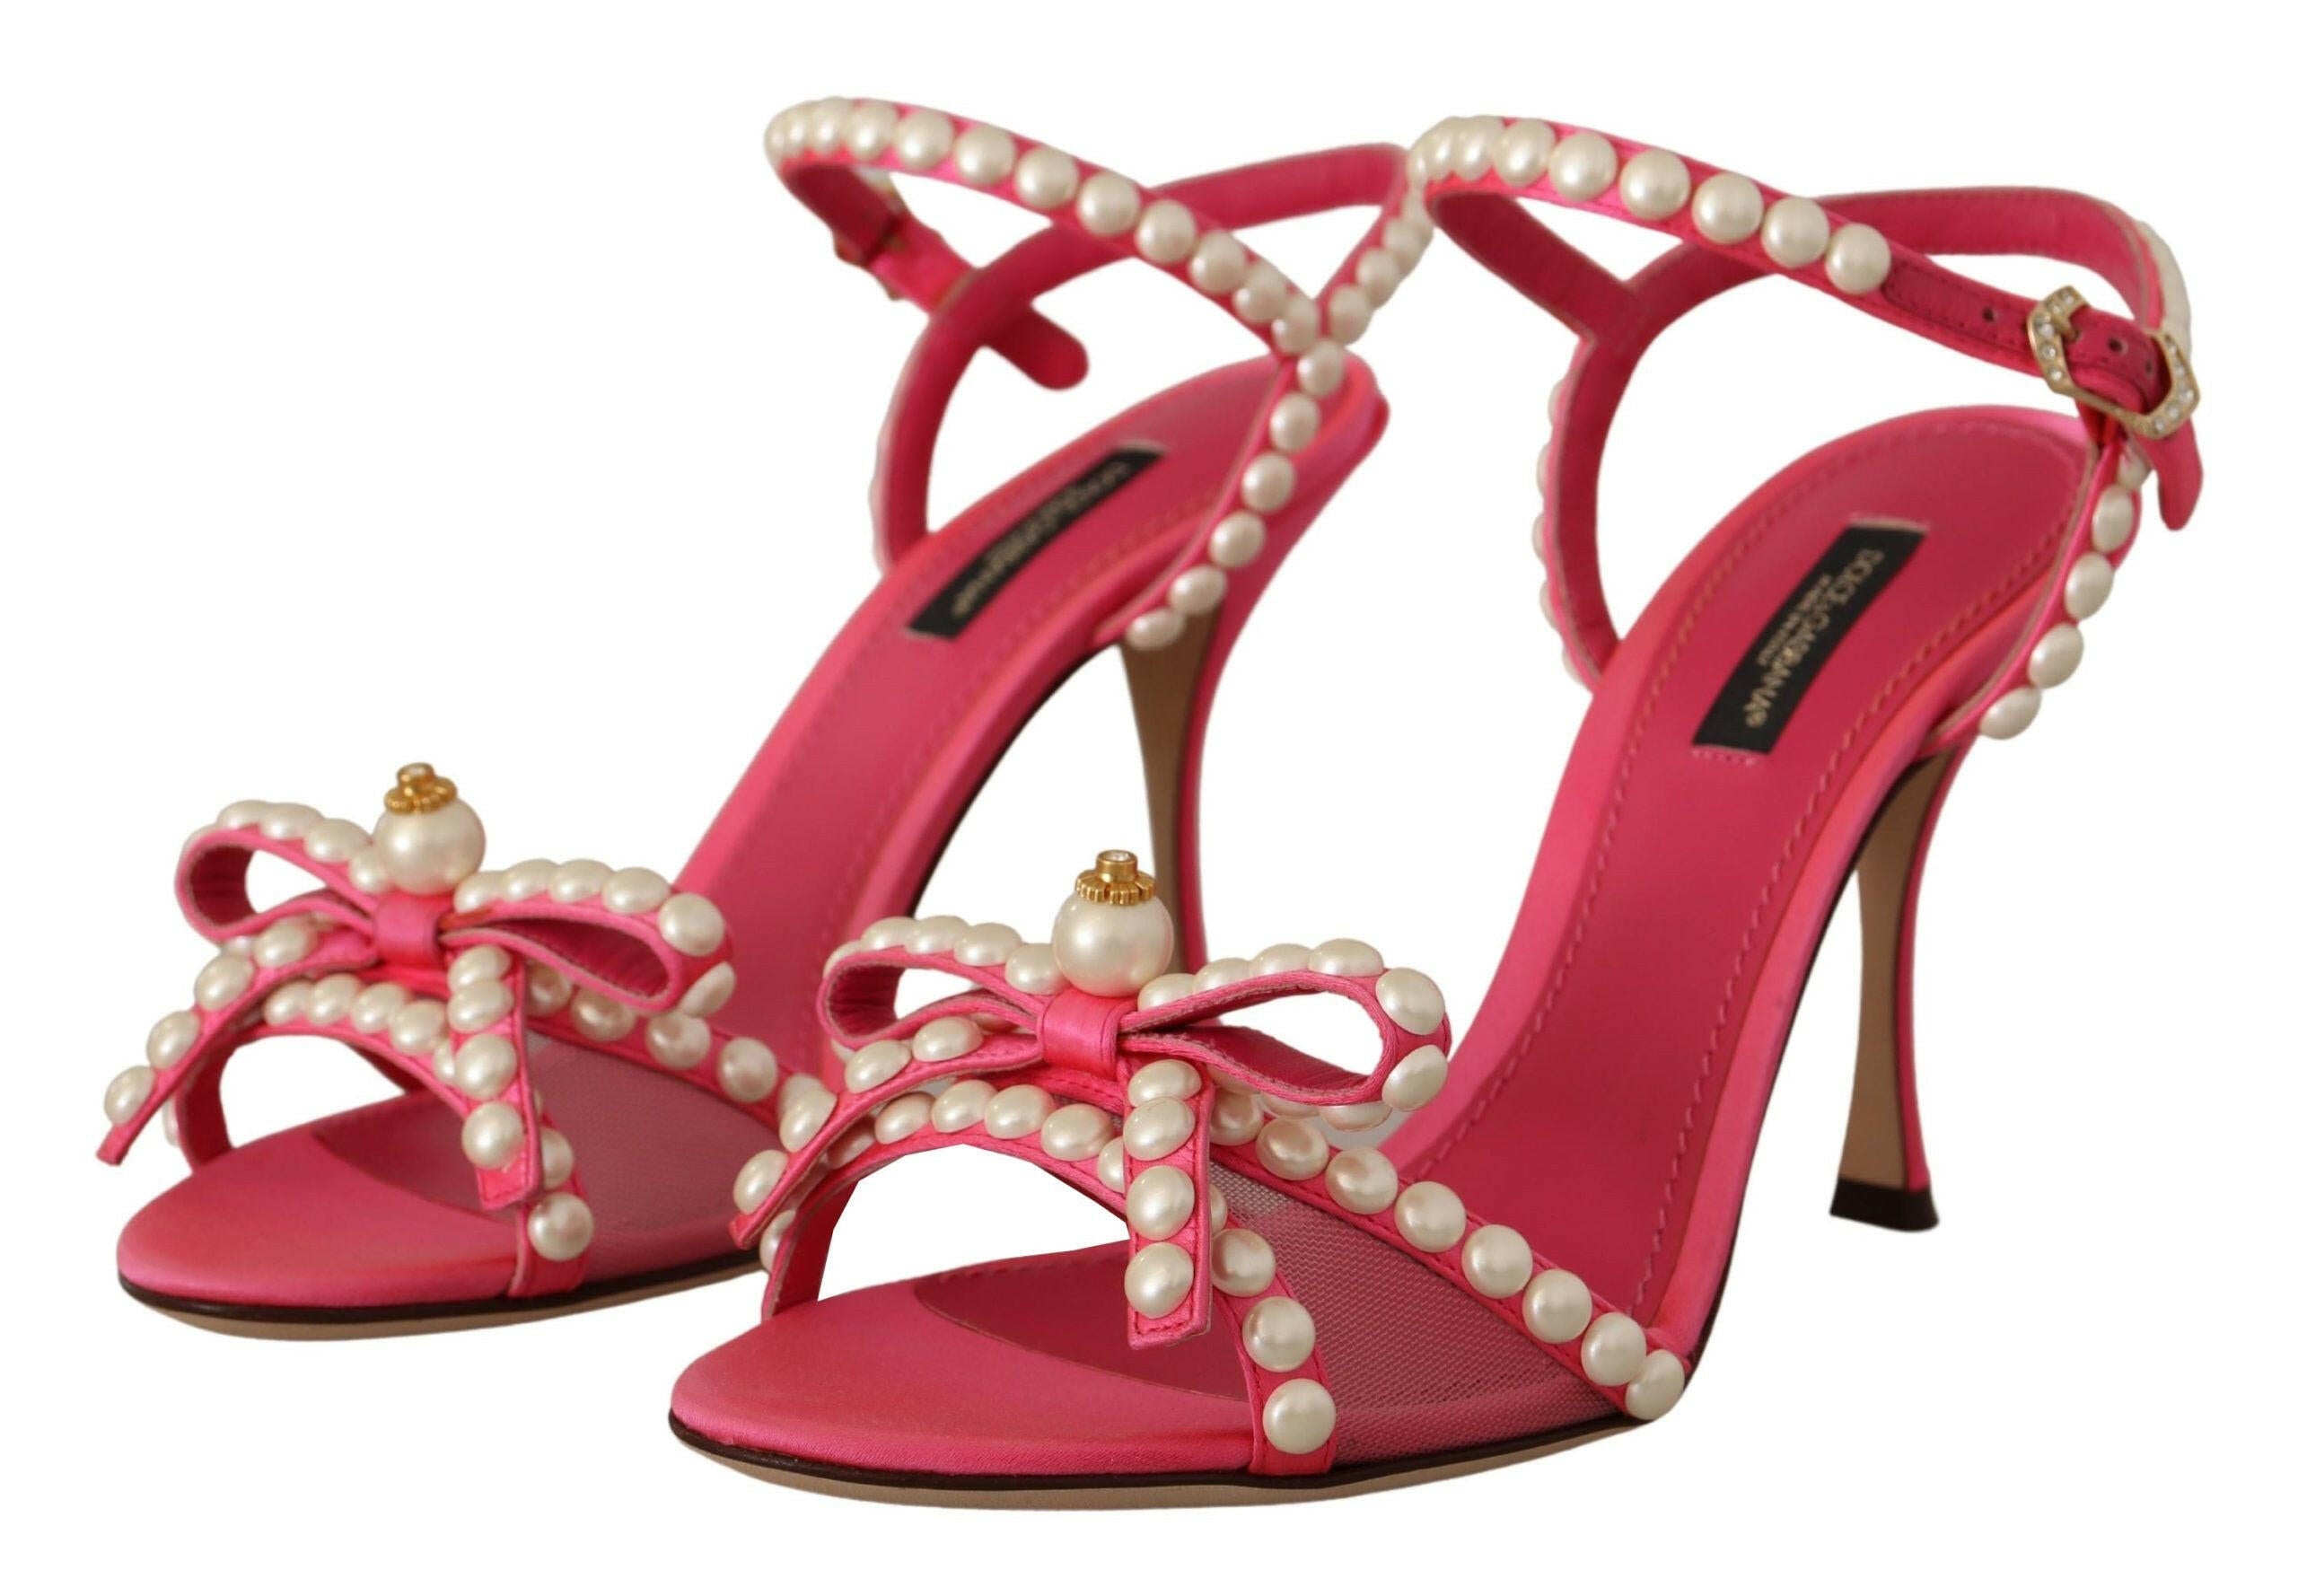 Dolce & Gabbana Pink Satin White Pearl Crystals Heels Shoes - GENUINE AUTHENTIC BRAND LLC  